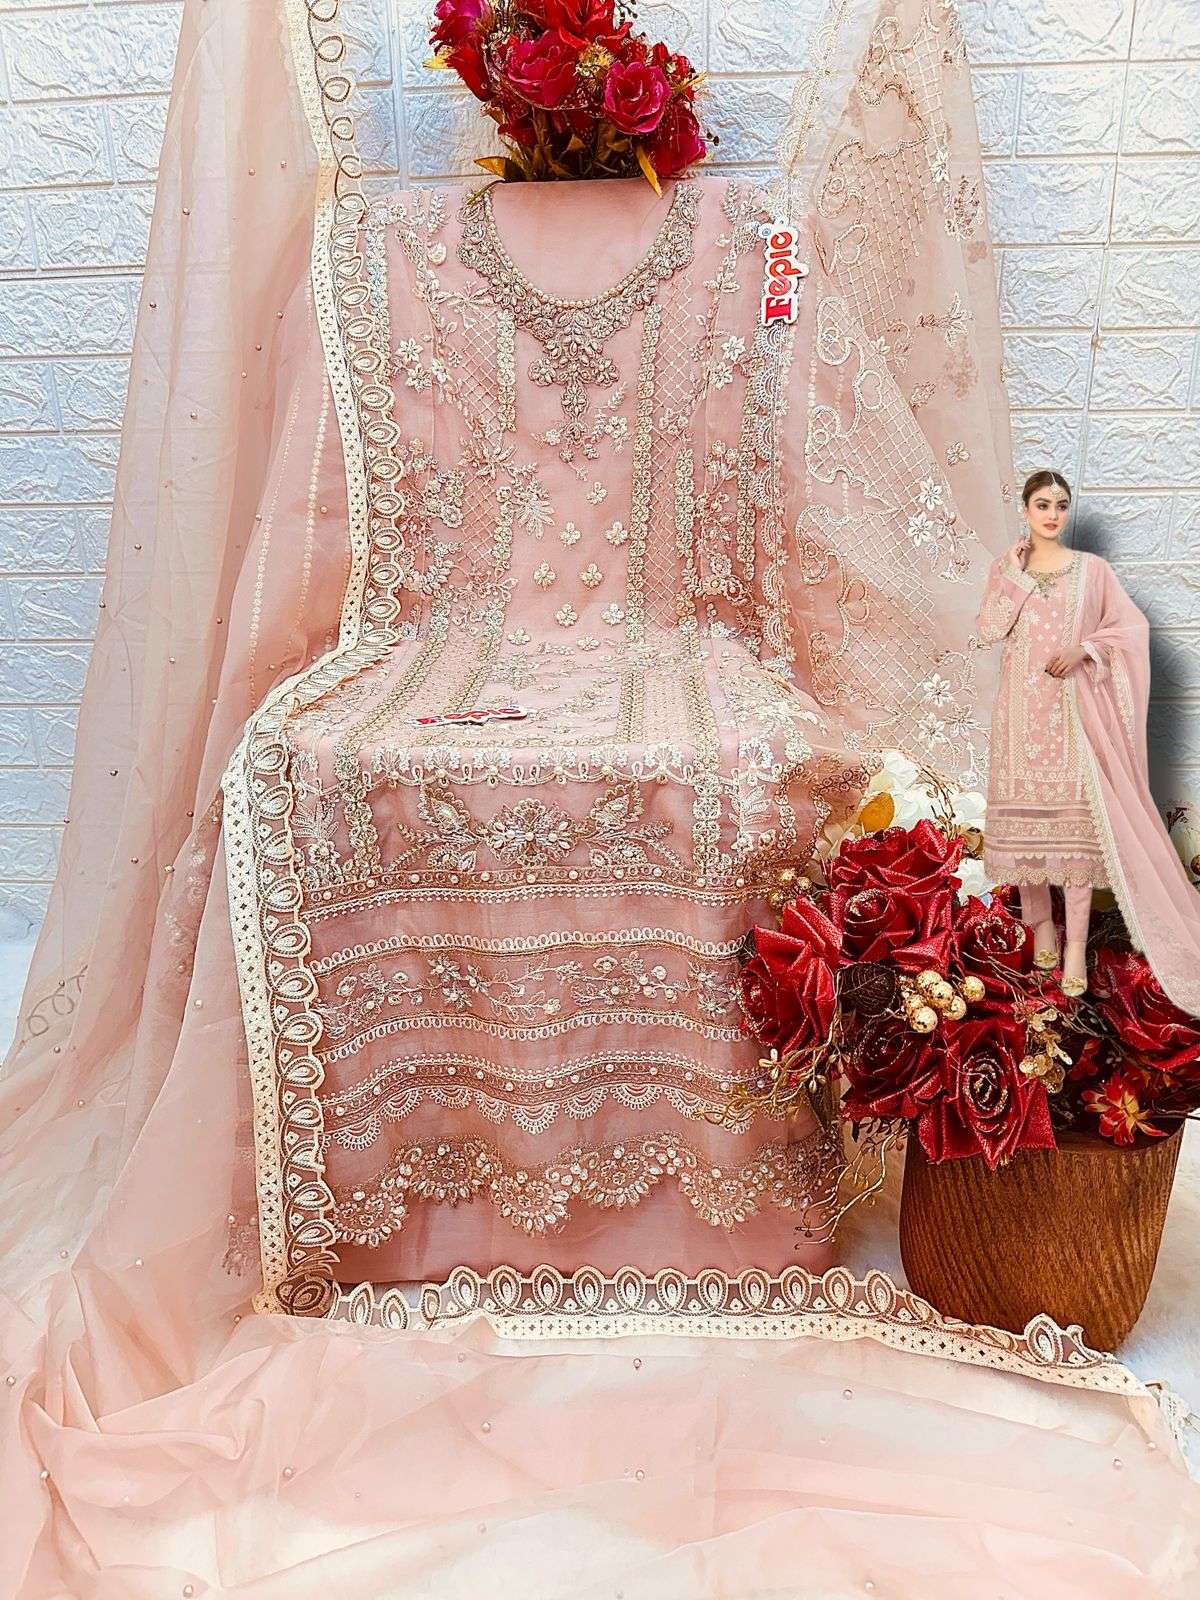 Fepic rosemeen 1593 colours organza designer pakistani suits collection wholesale price